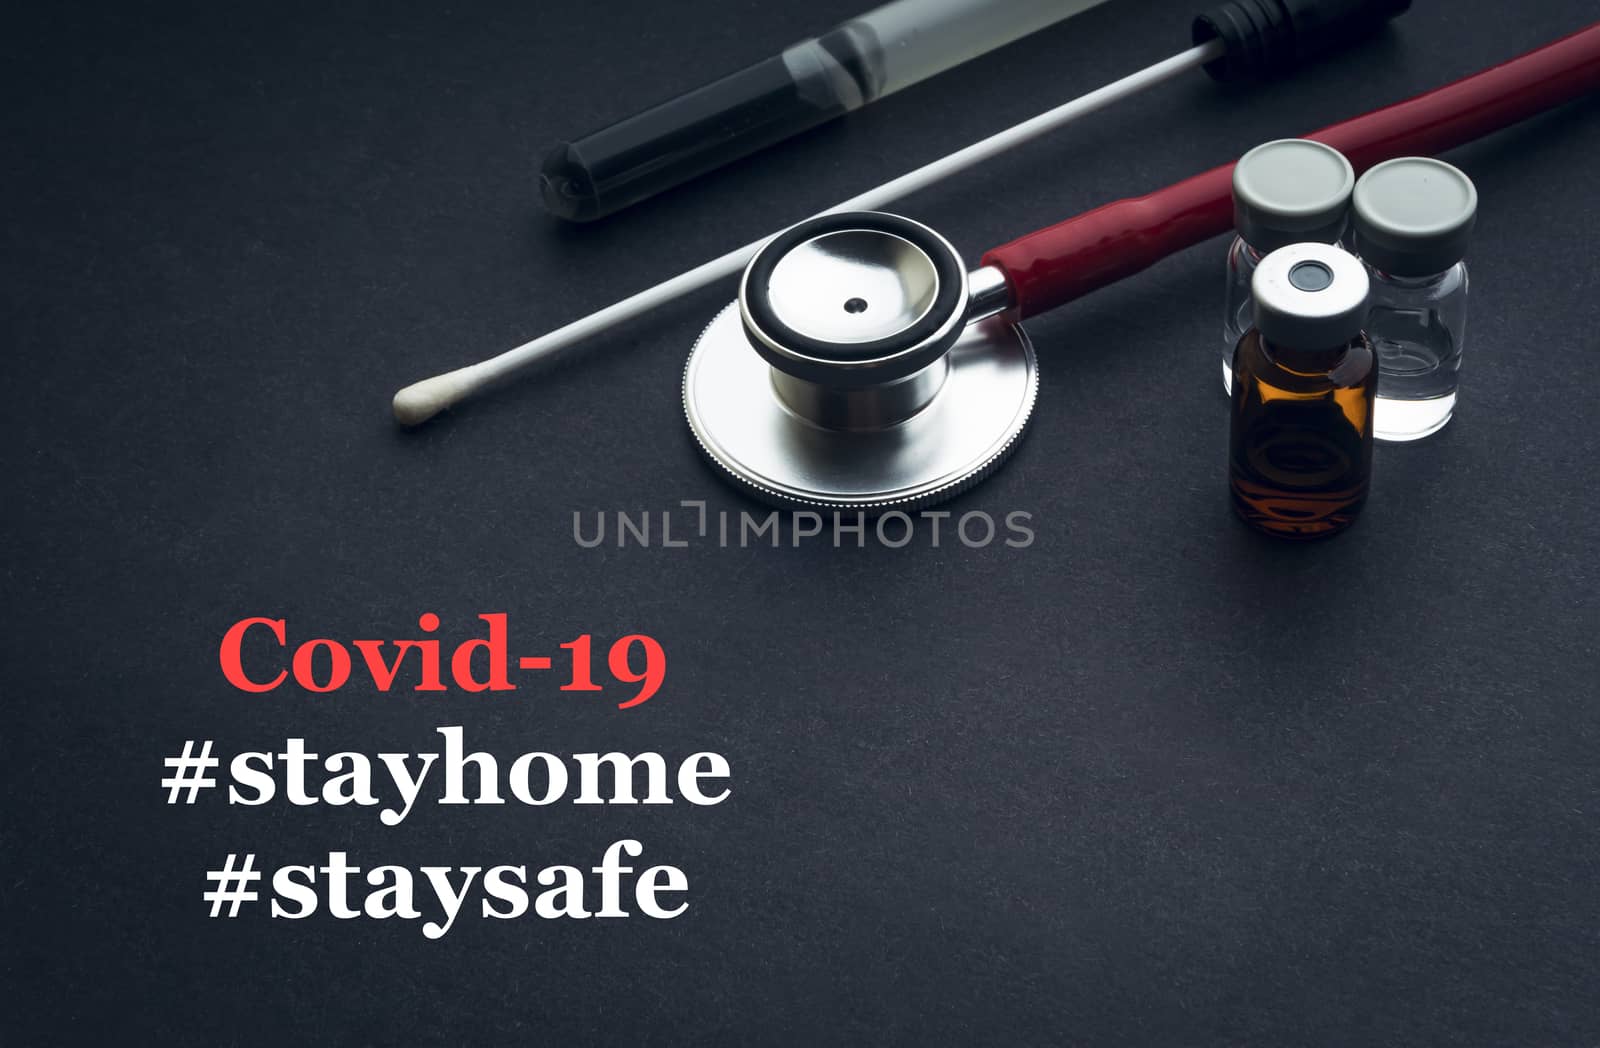 COVID-19 or CORONAVIRUS STAY HOME STAY SAFE text with stethoscope, medical swab and vial on black background by silverwings